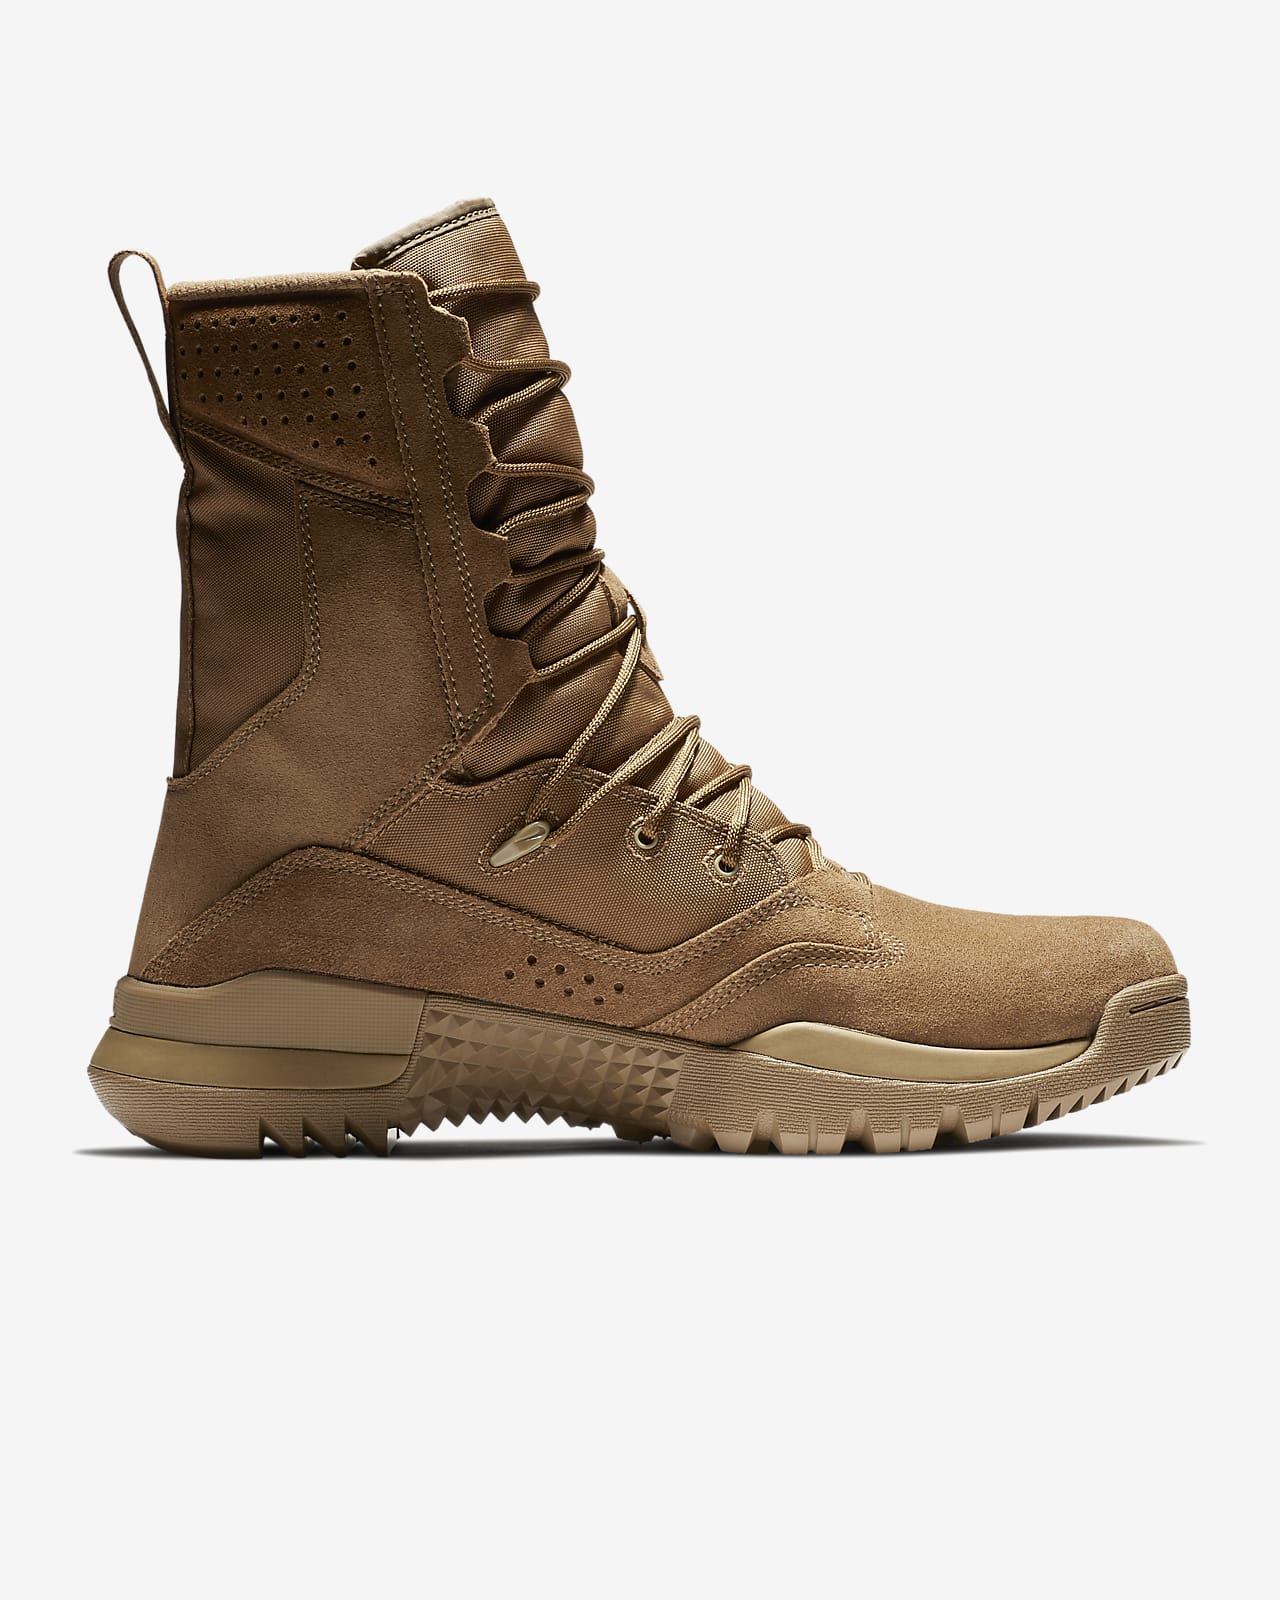 nike insulated boots